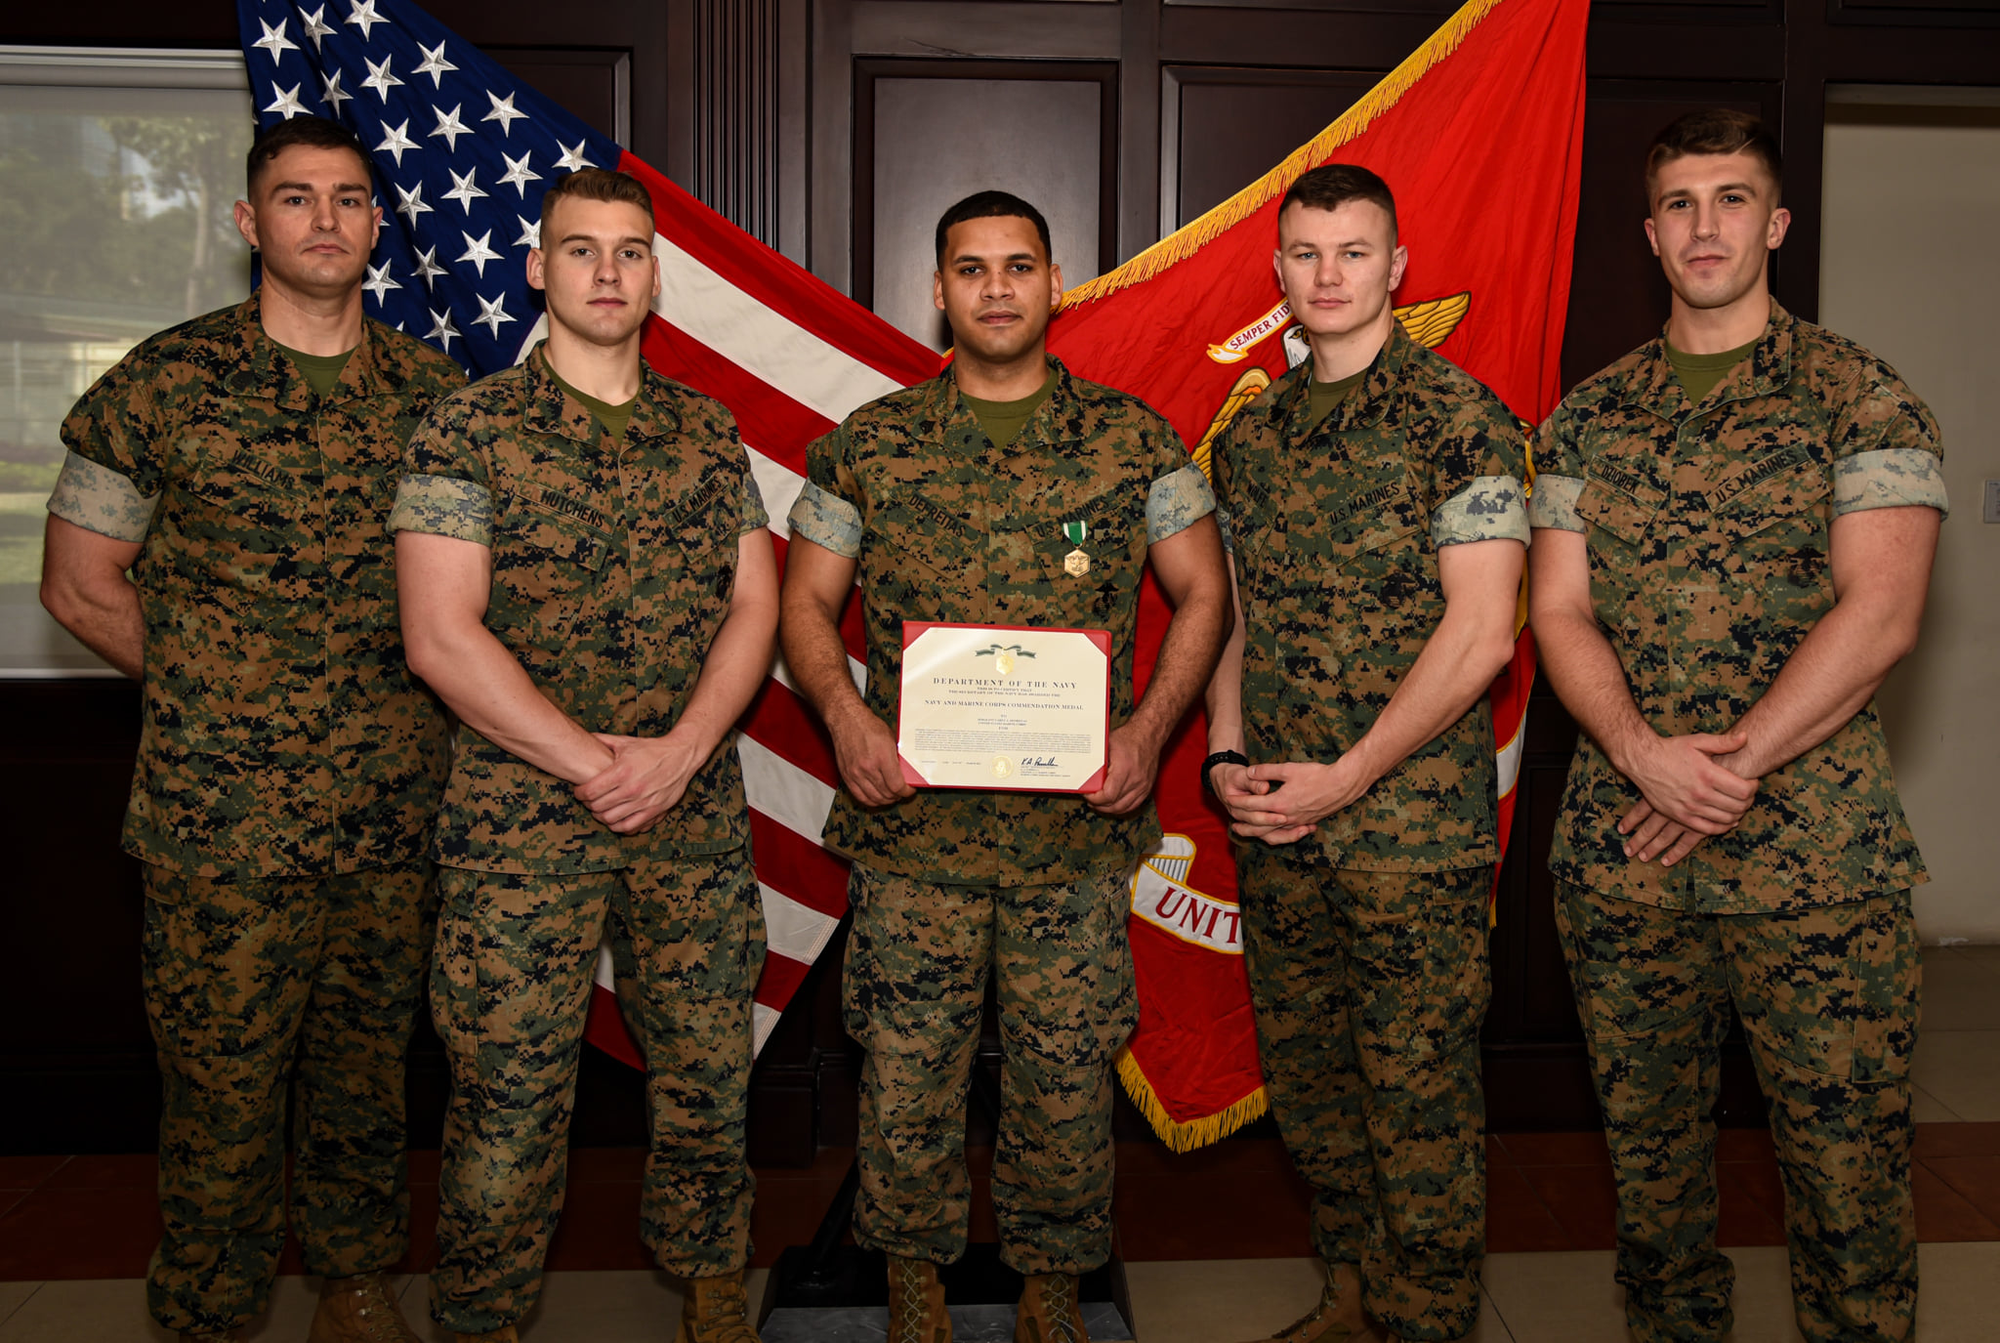 US marine security guards save young boy from drowning in Vietnam